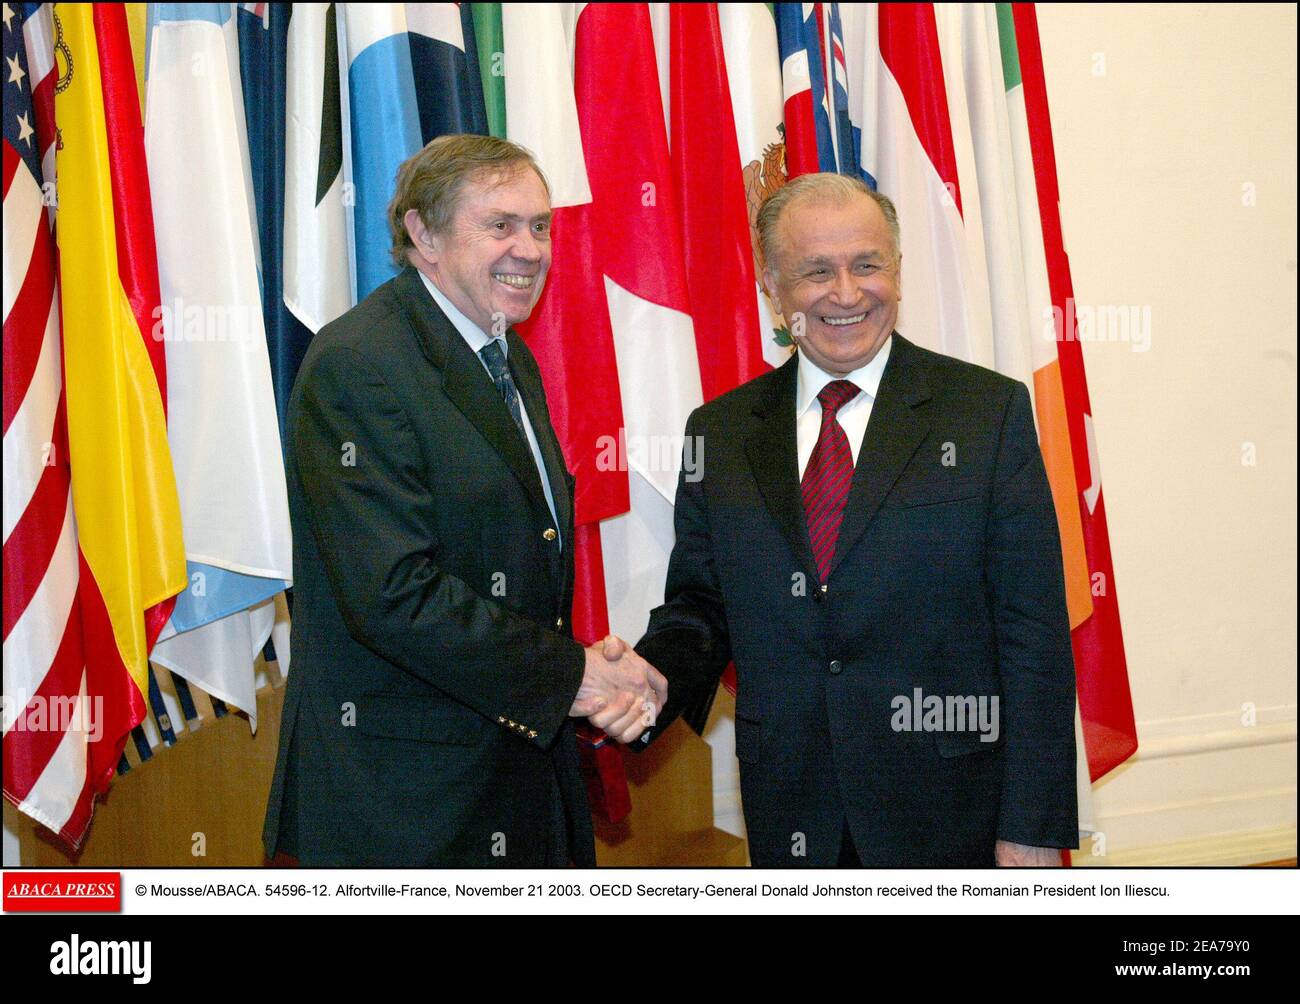 © Mousse/ABACA. 54596-12. Alfortville-France, November 21 2003. OECD Secretary-General Donald Johnston received the Romanian President Ion Iliescu. Stock Photo